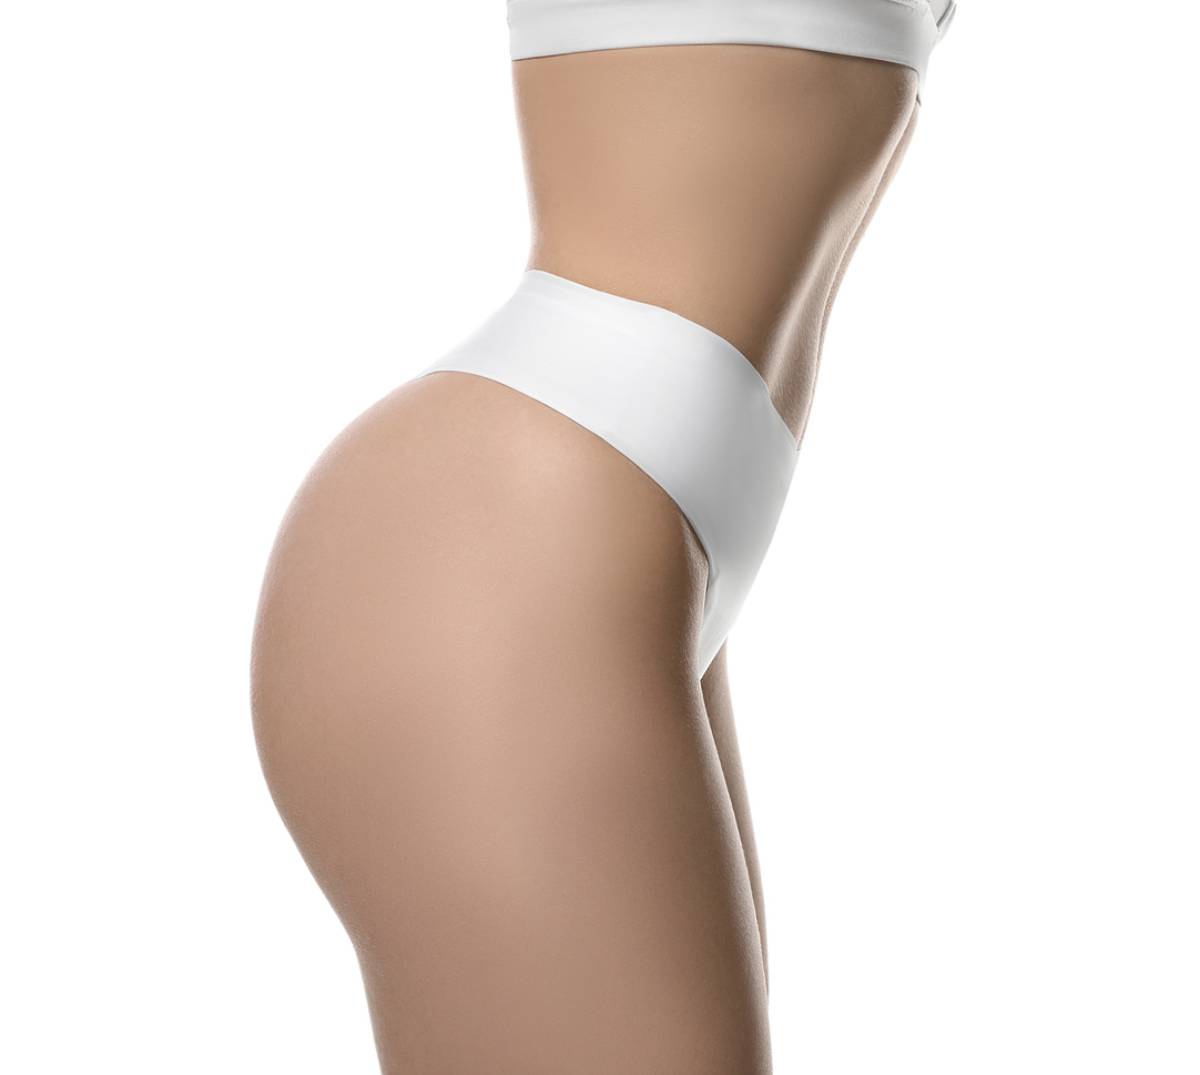 concept image of woman after thigh lift without cellulite